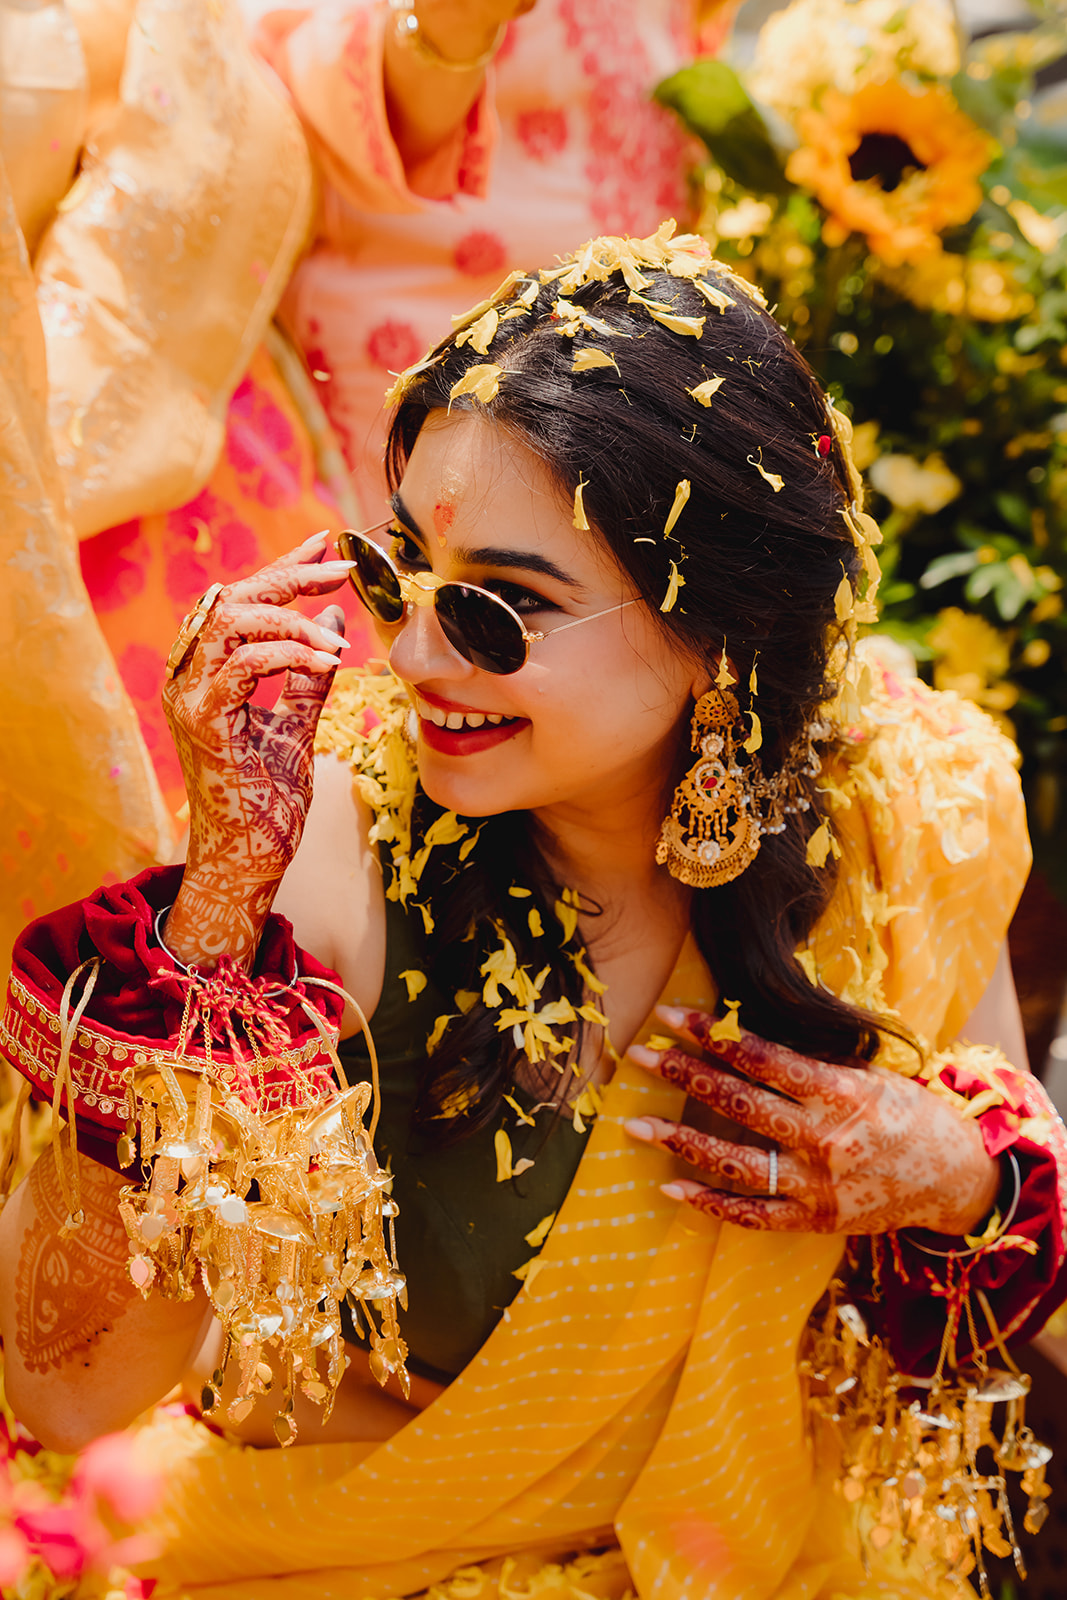 Golden moments: A stunning bride shines in the midst of her haldi ceremony